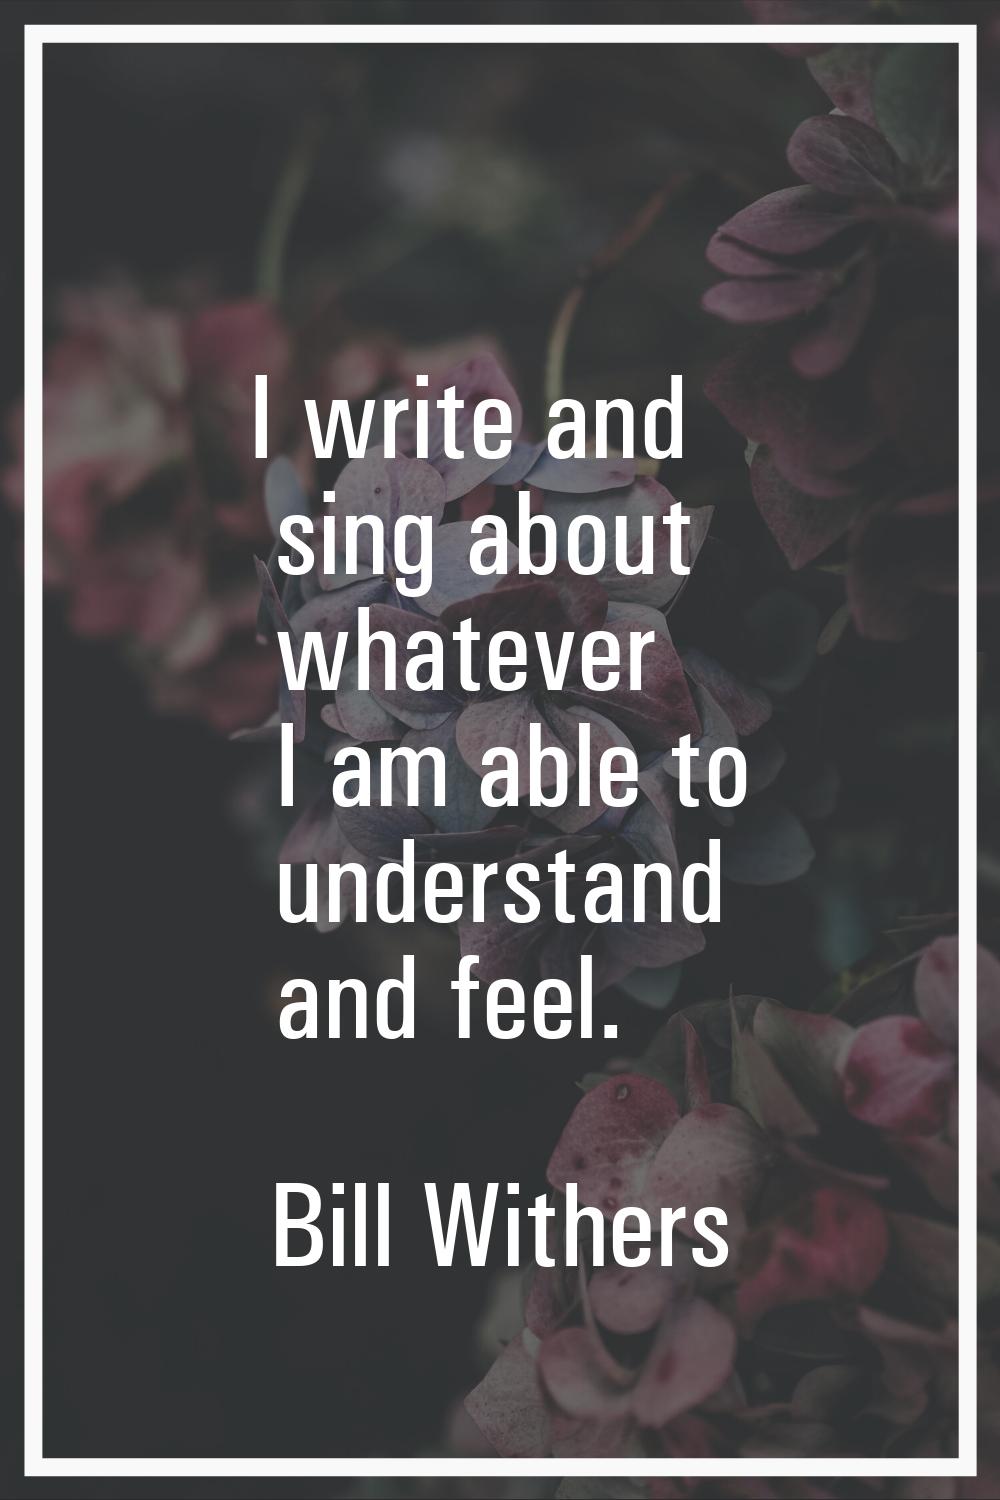 I write and sing about whatever I am able to understand and feel.